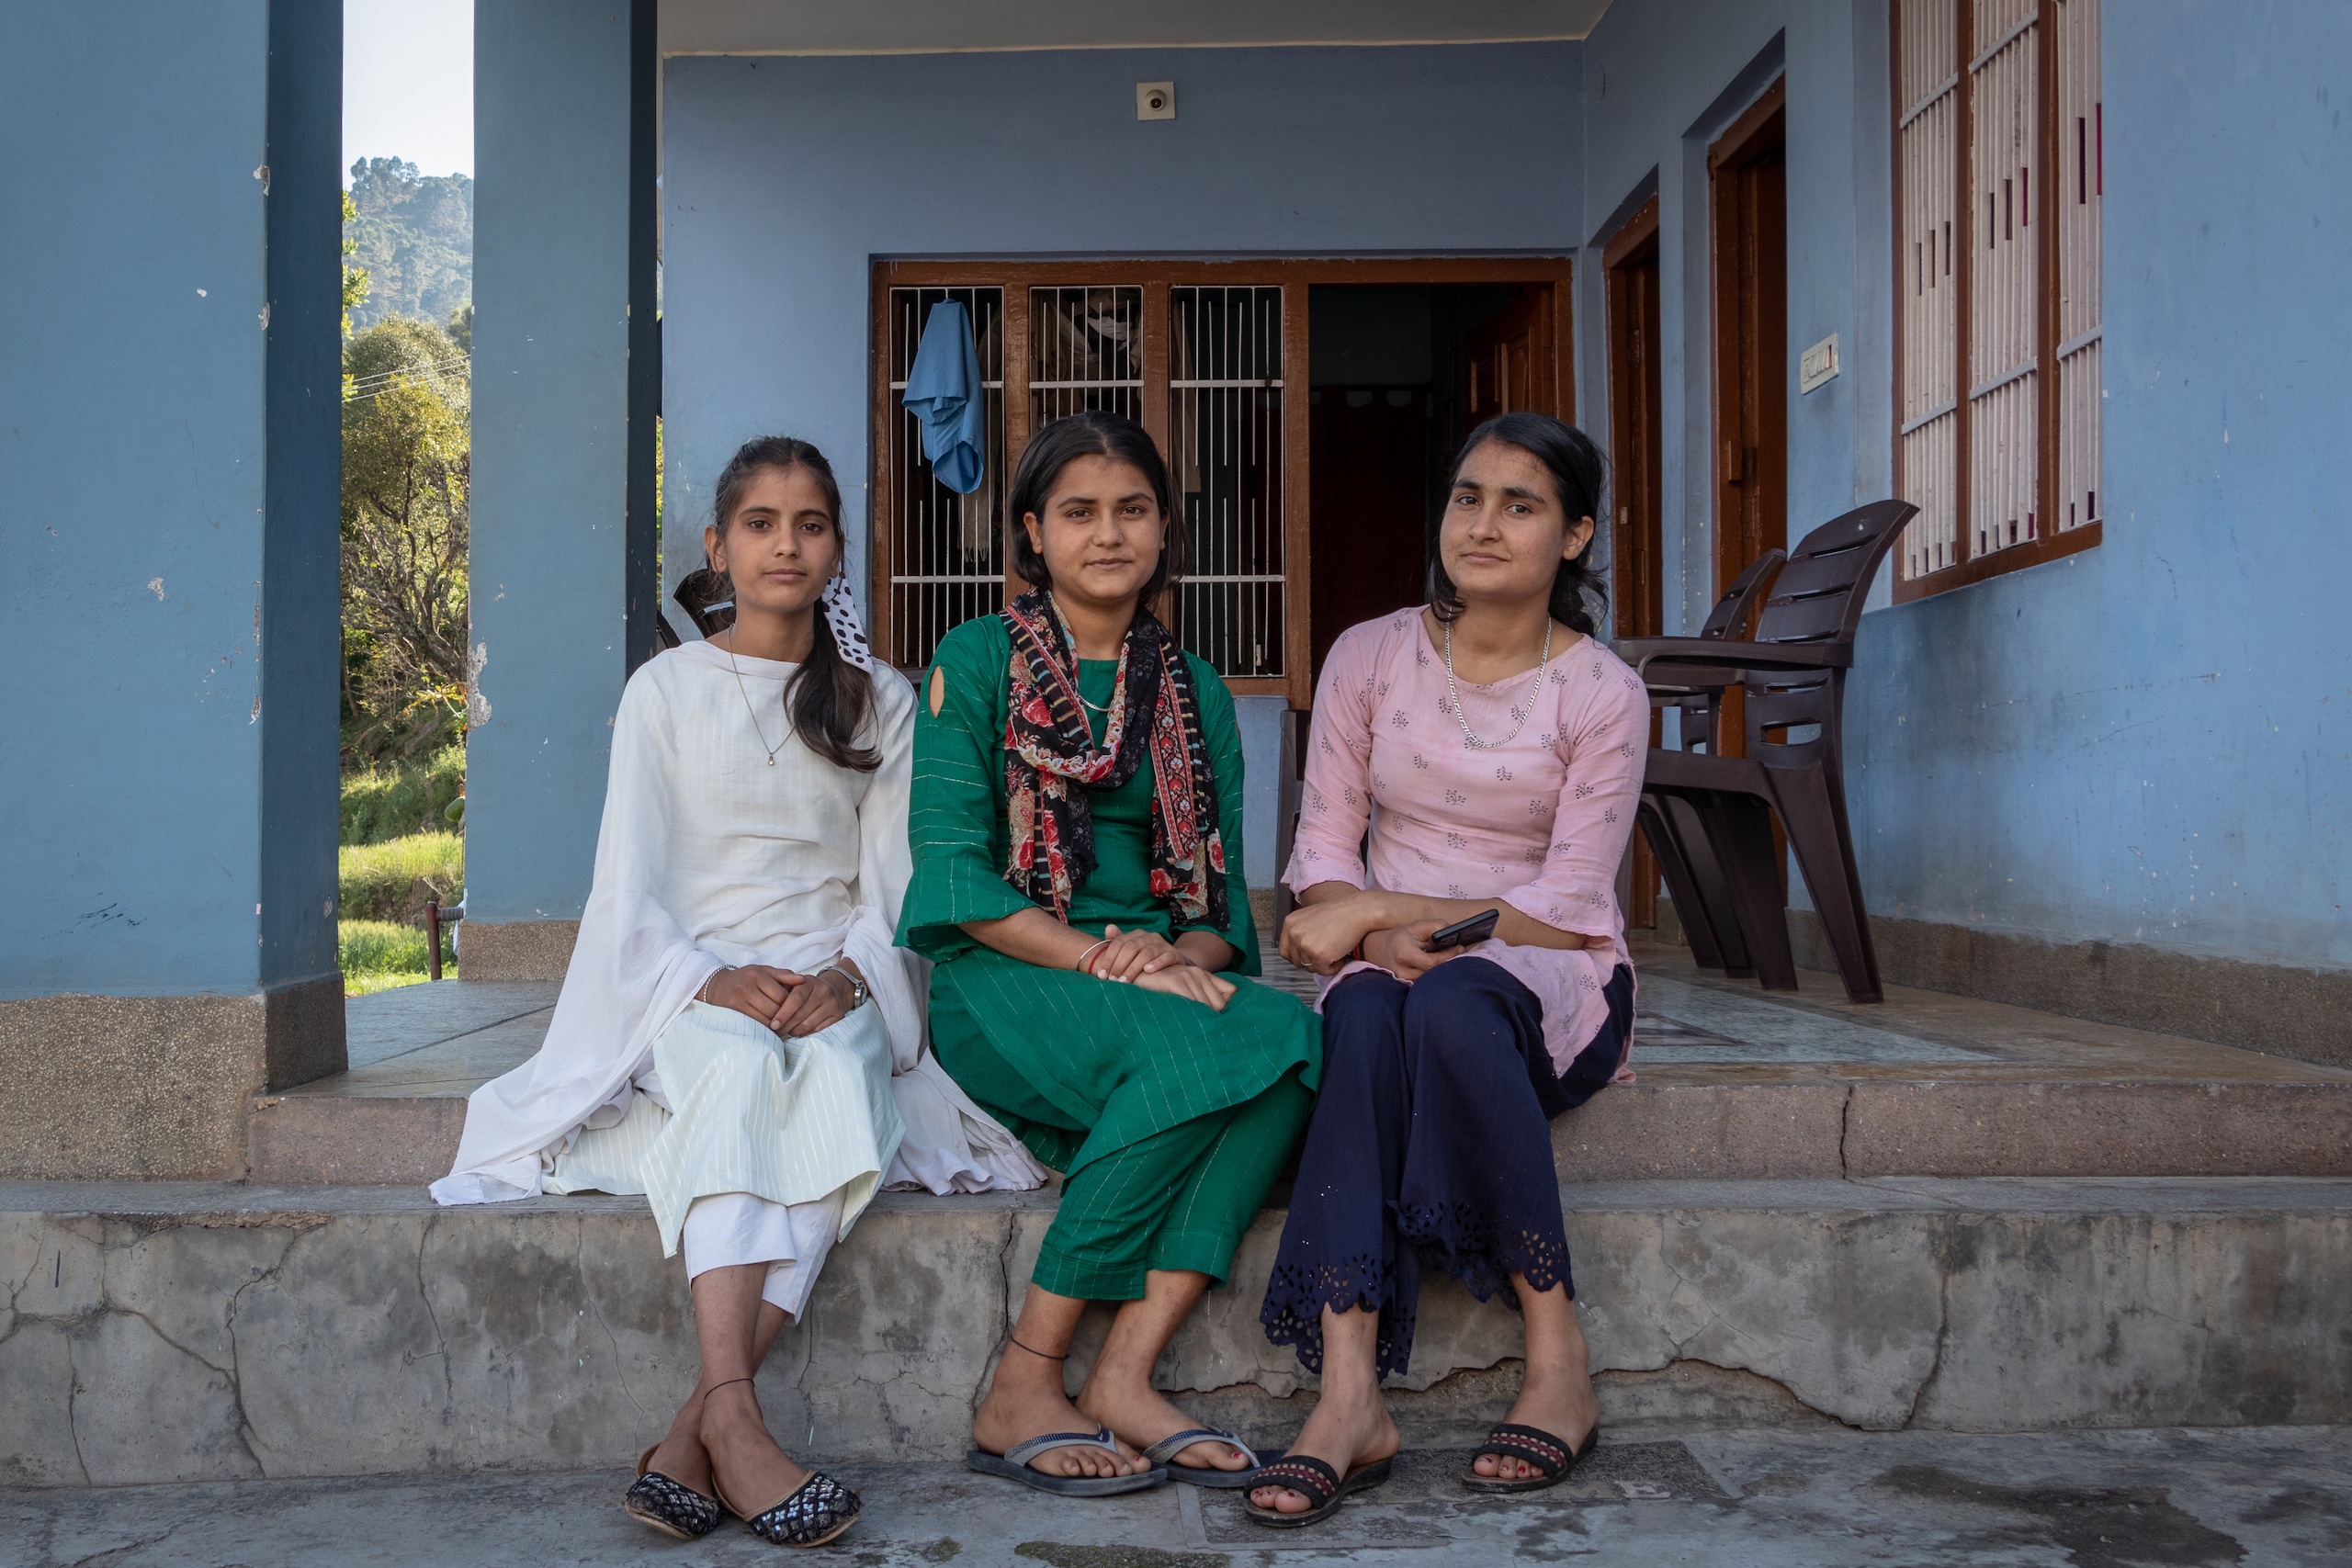 Vaishali Devi (Centre), 16, a school student with her siblings, Jyoti & Poonam pose for a photograph at their home in Kotli village of Reasi district in Jammu and Kashmir. (Image : Ashish Kumar Kataria)